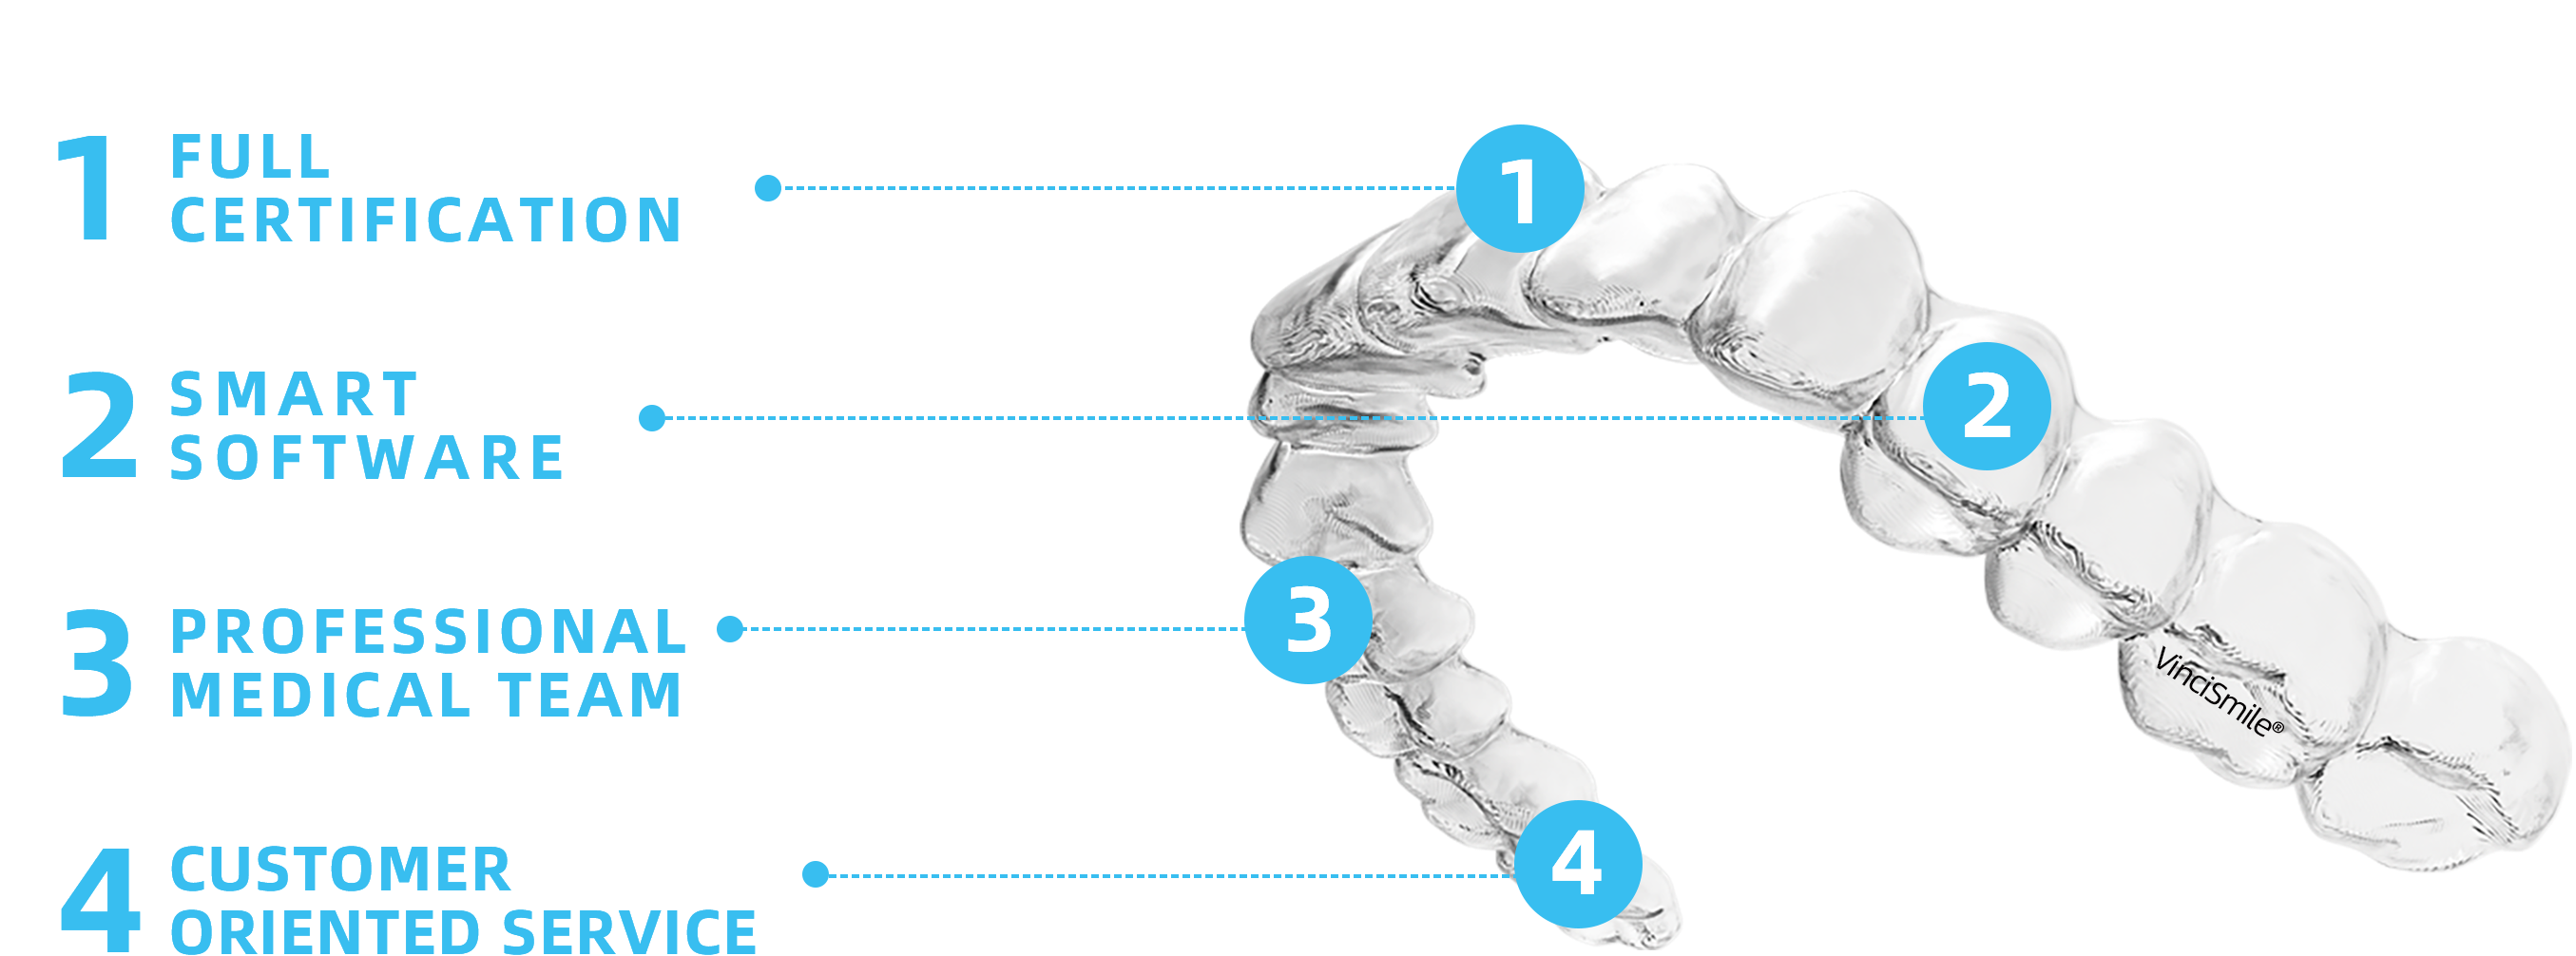 show the main four characteristics of VinciSmile clear aligners: full certificates, smart software, professional medical team and customer oriented service